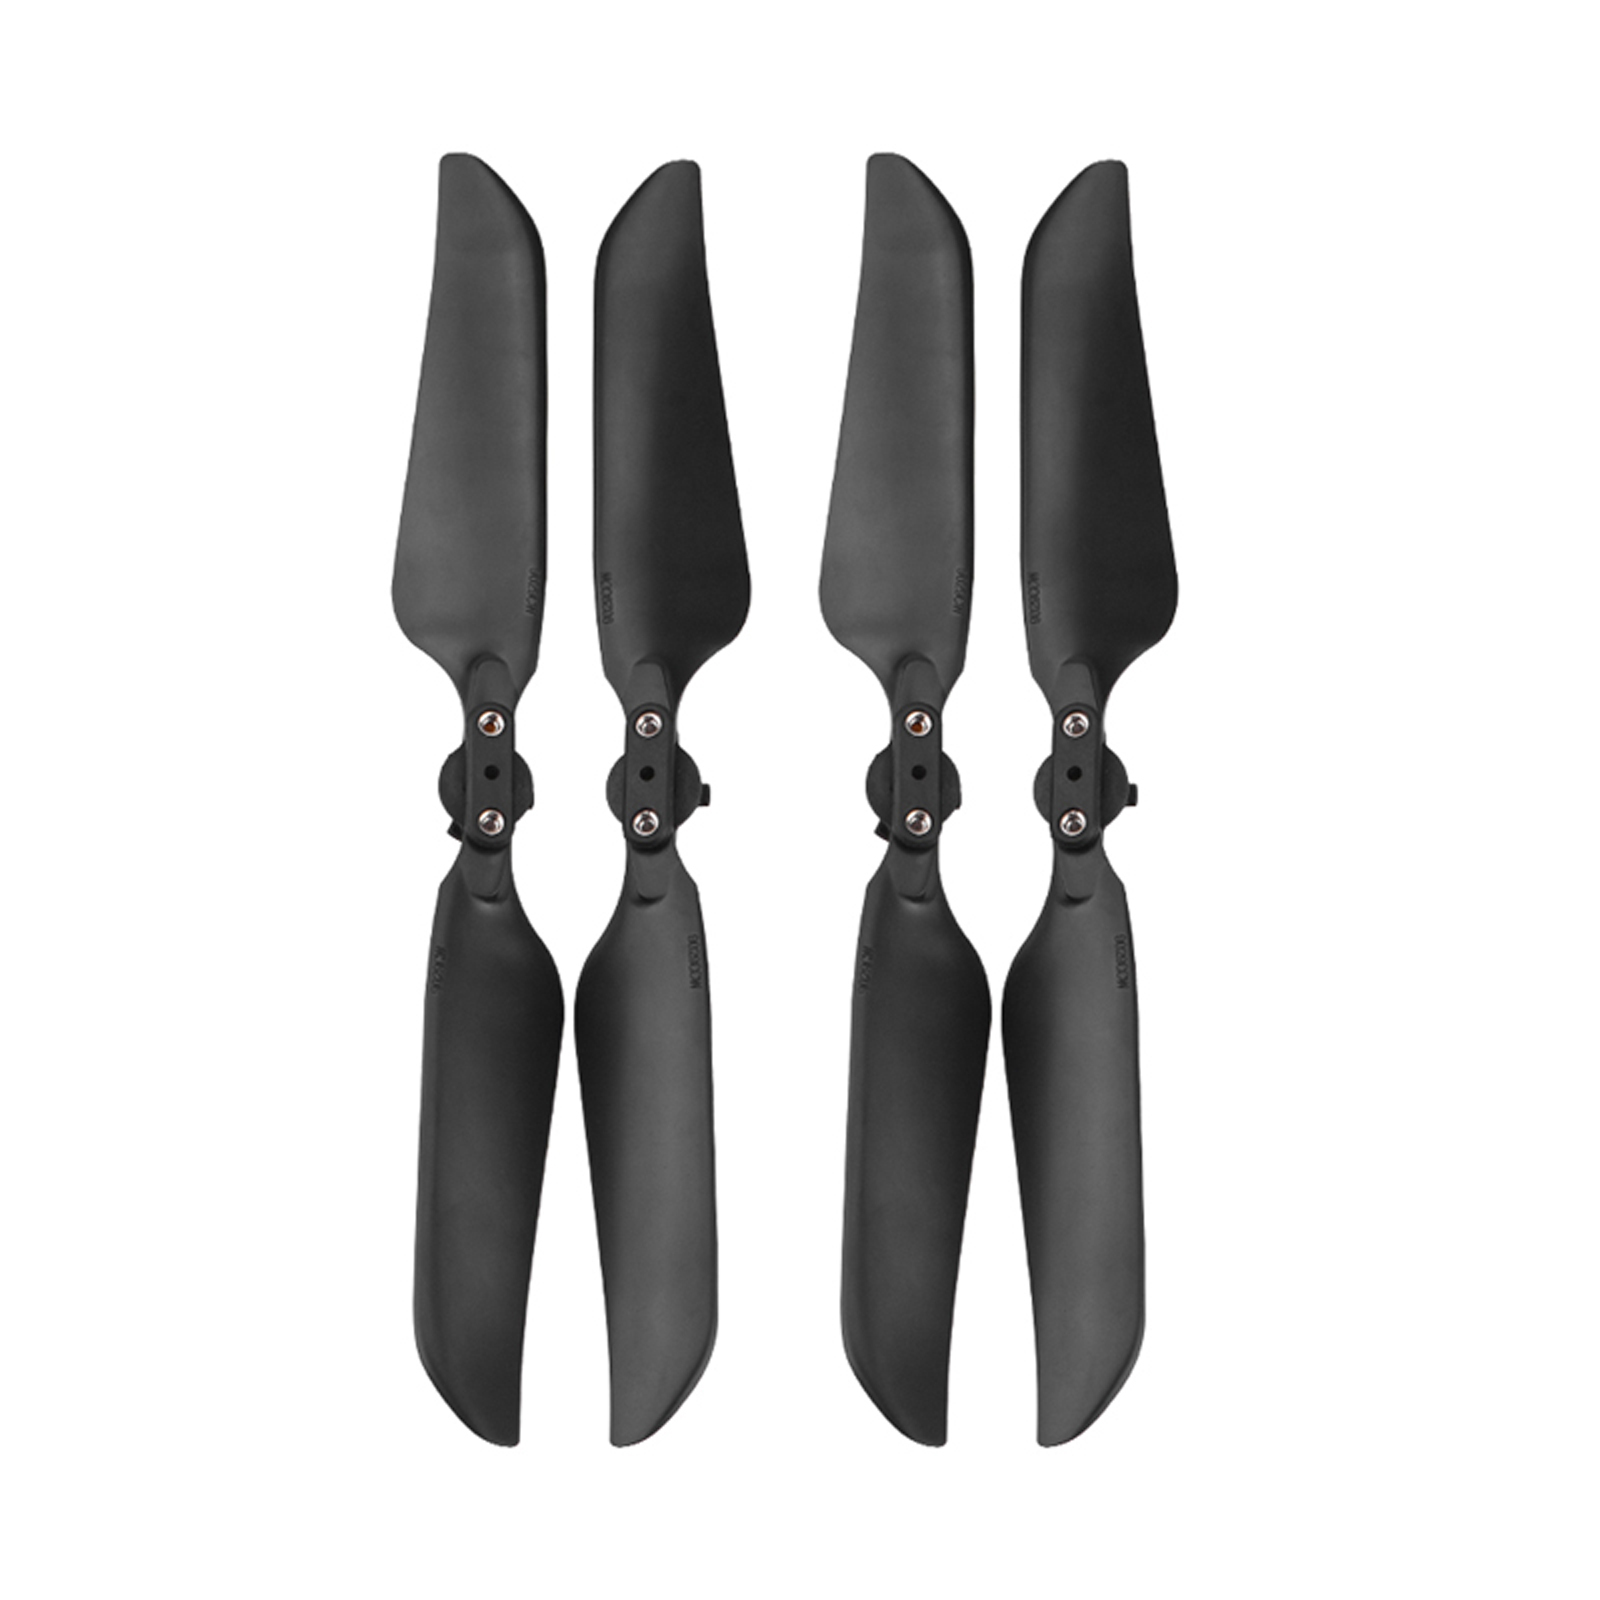 2 Pairs Drone Propellers Quick Release Blade Drone Accessories Compatible For Autel Evo Ii/evo Ii Pro Drone 2 pairs black